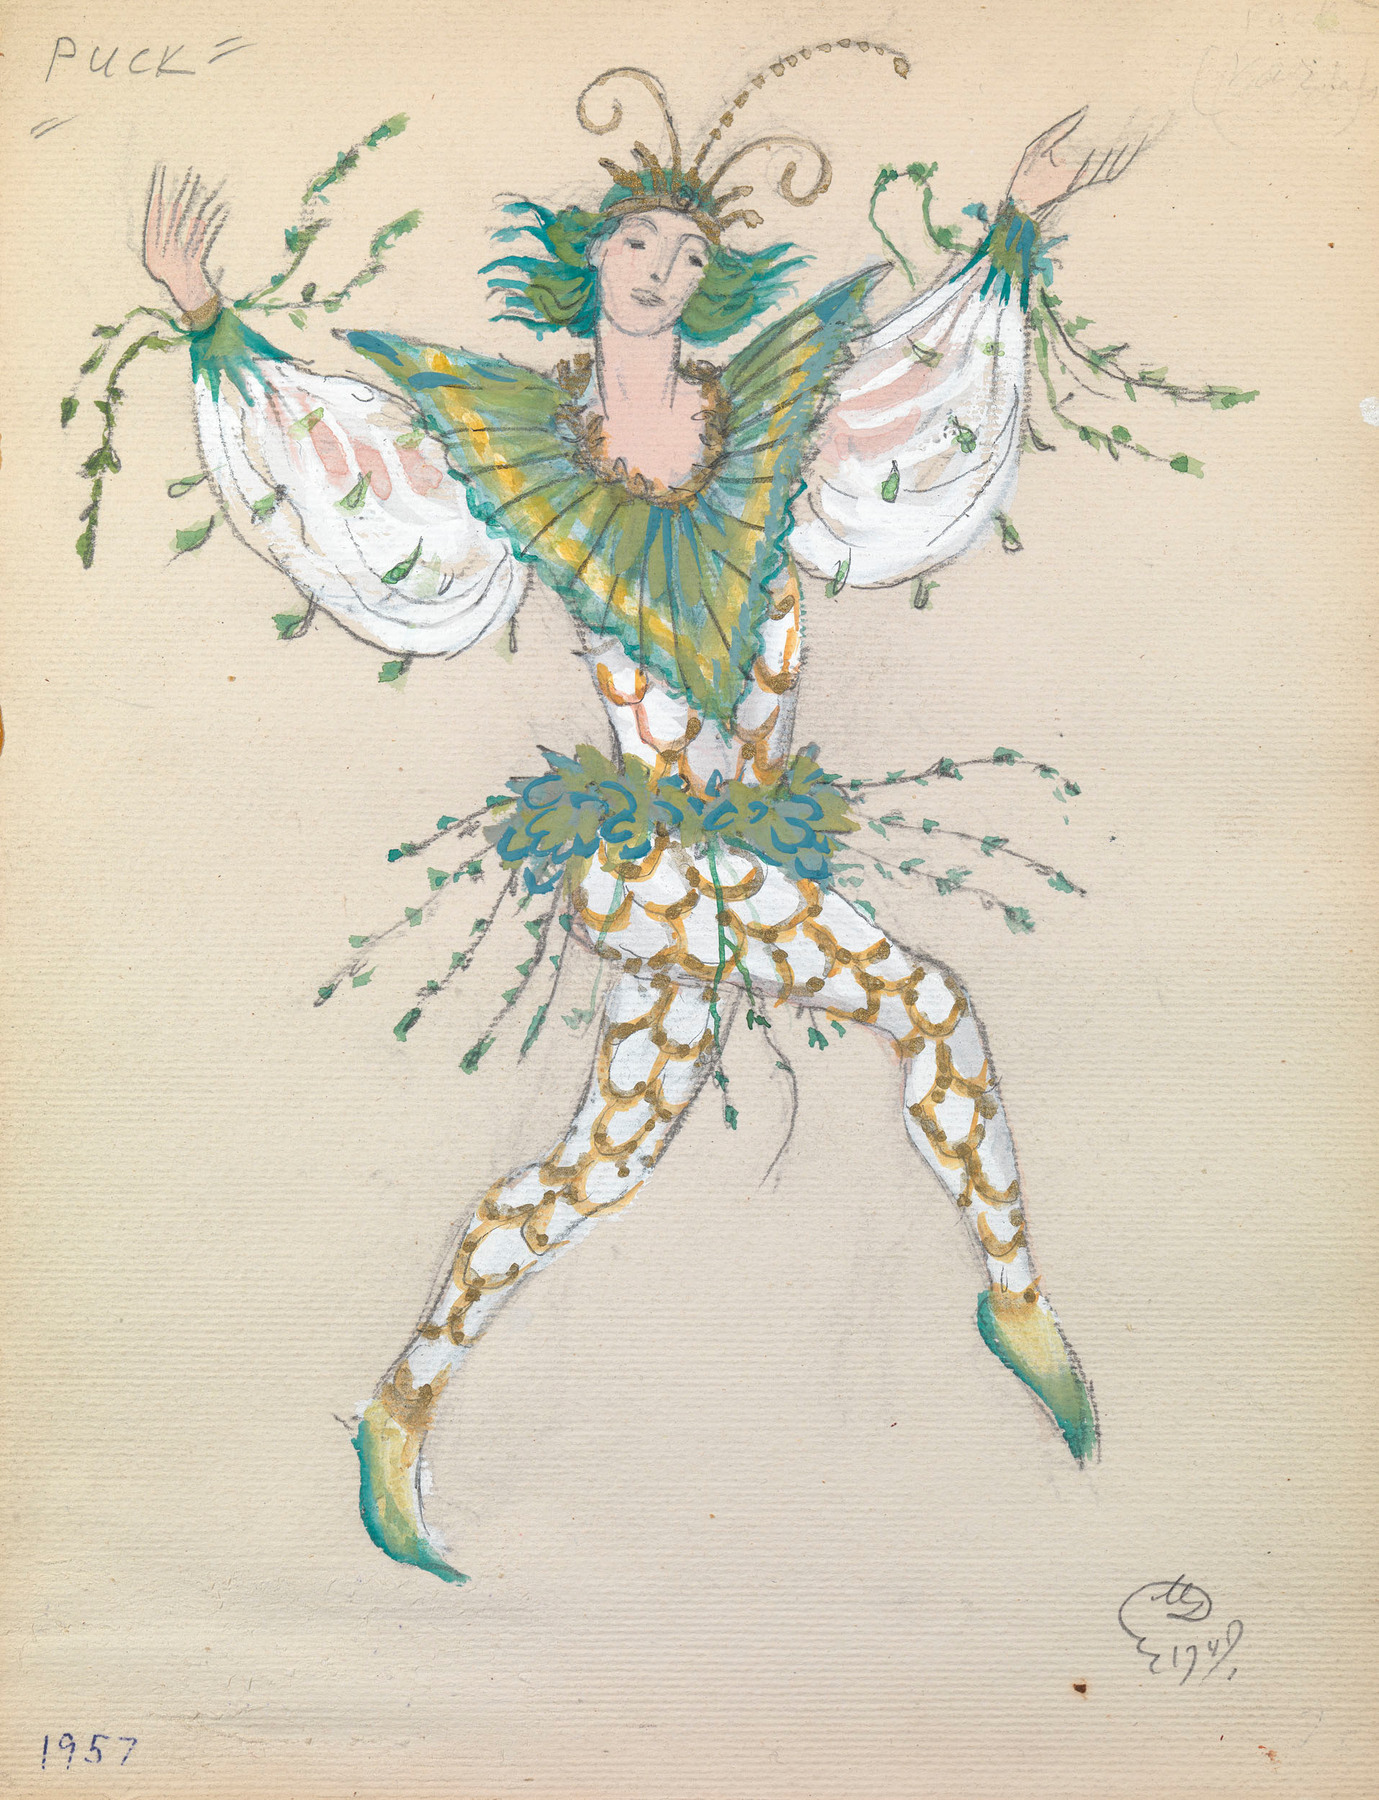 A Collection of Set and Costume Designs for Les Ballets Ruth Sorel, Accompanied by Photoengraved Plates, Photo Prints and Repertoire Brochures